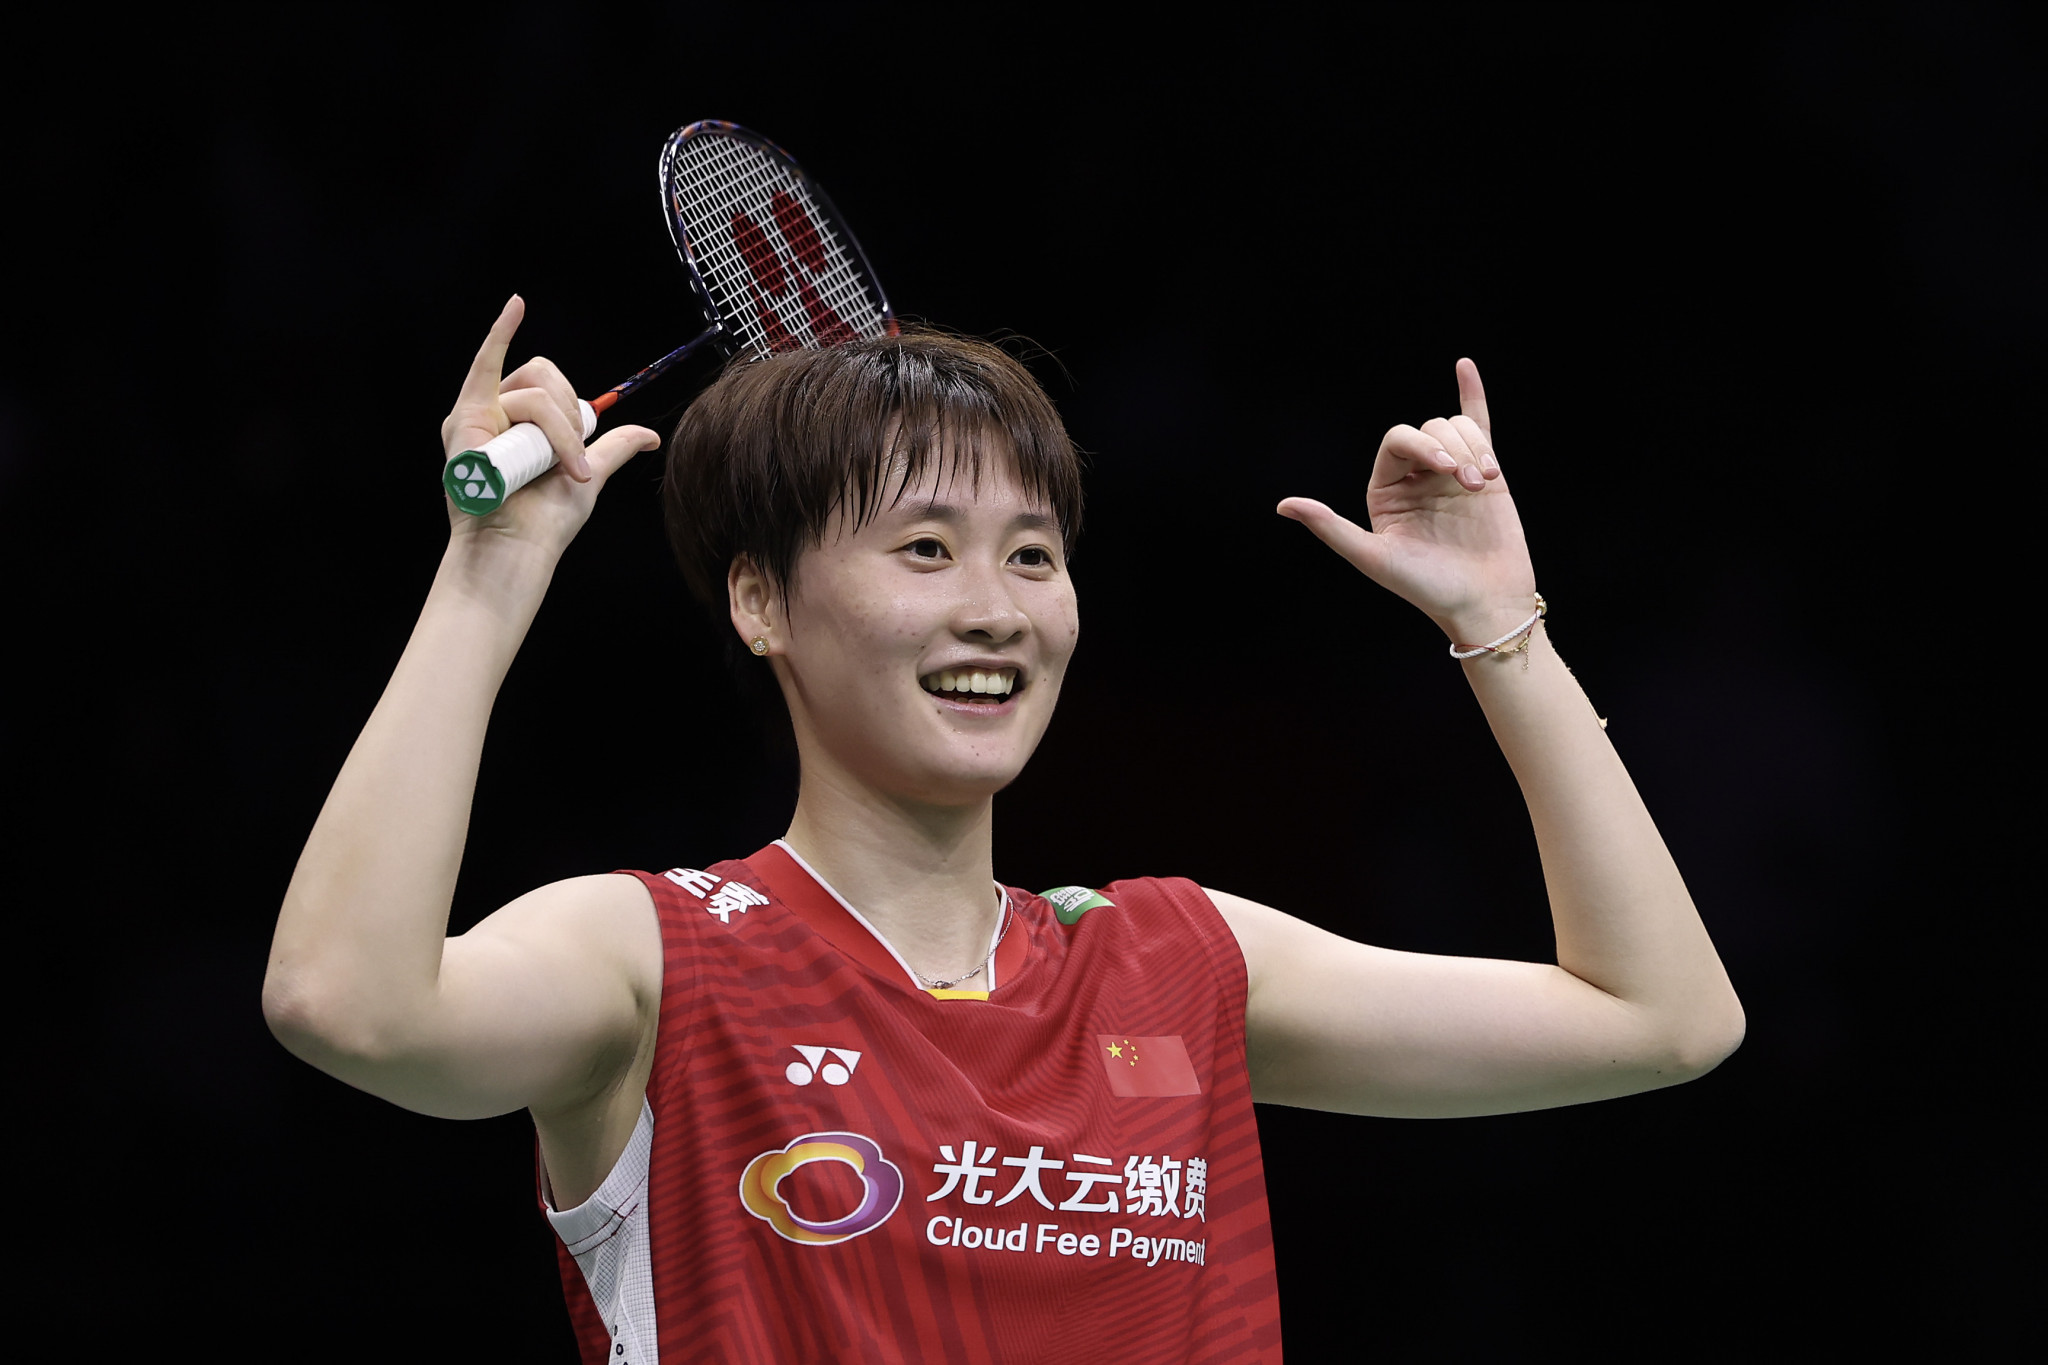 Olympic champion Chen Yufei wrapped up China's 3-0 victory over Indonesia in the quarter-finals of the Surdiman Cup in Suzhou ©Getty Images